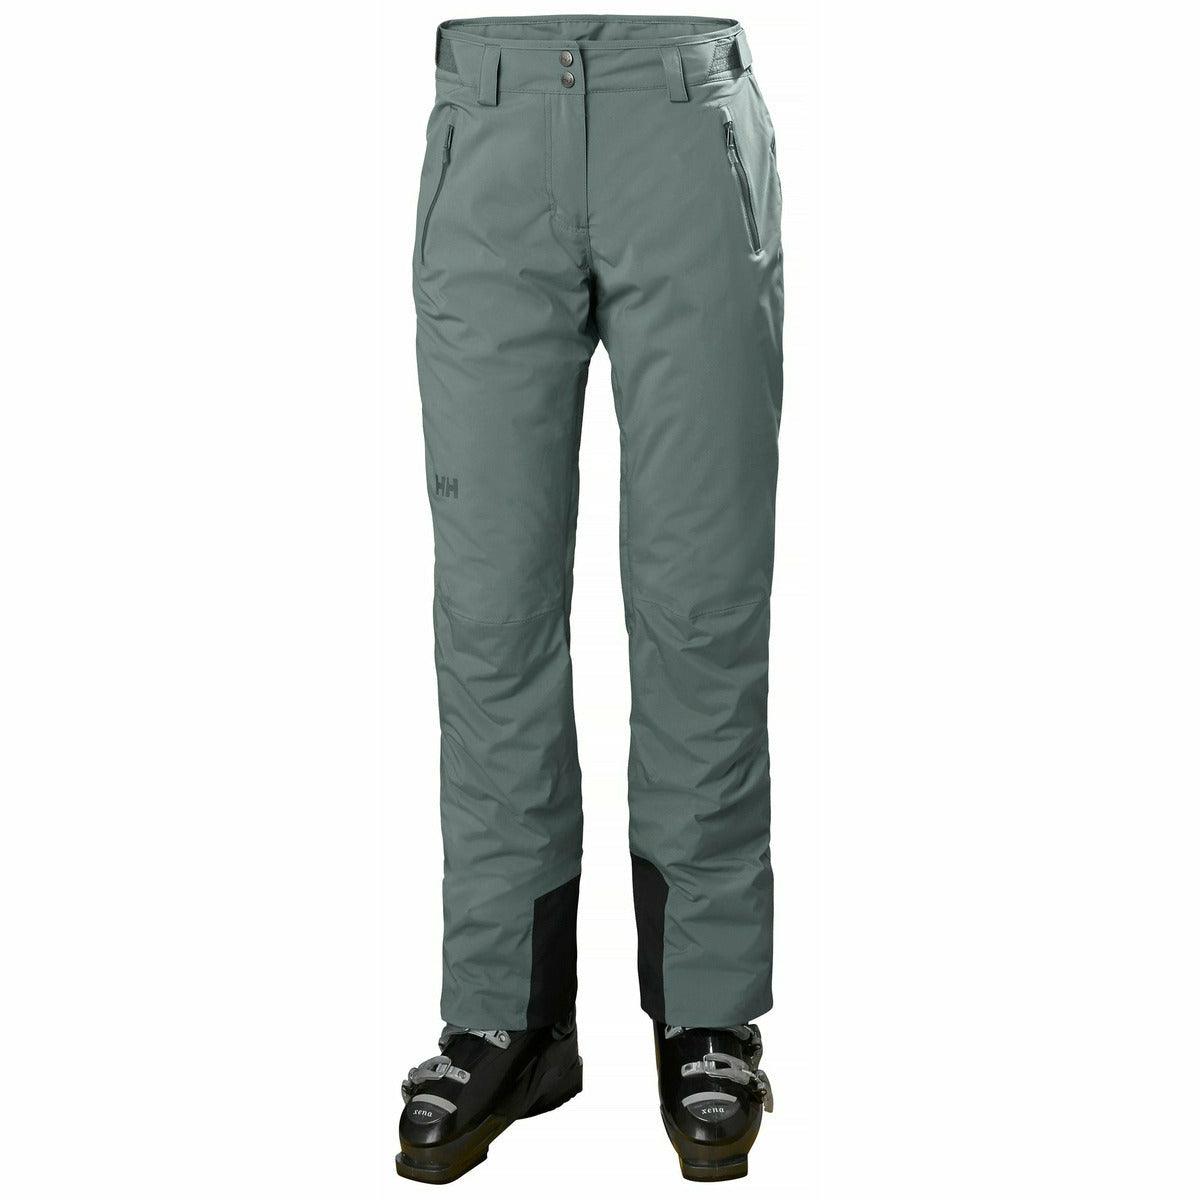 Helly Hansen W Legendary Insulated Pant im Outlet Sale